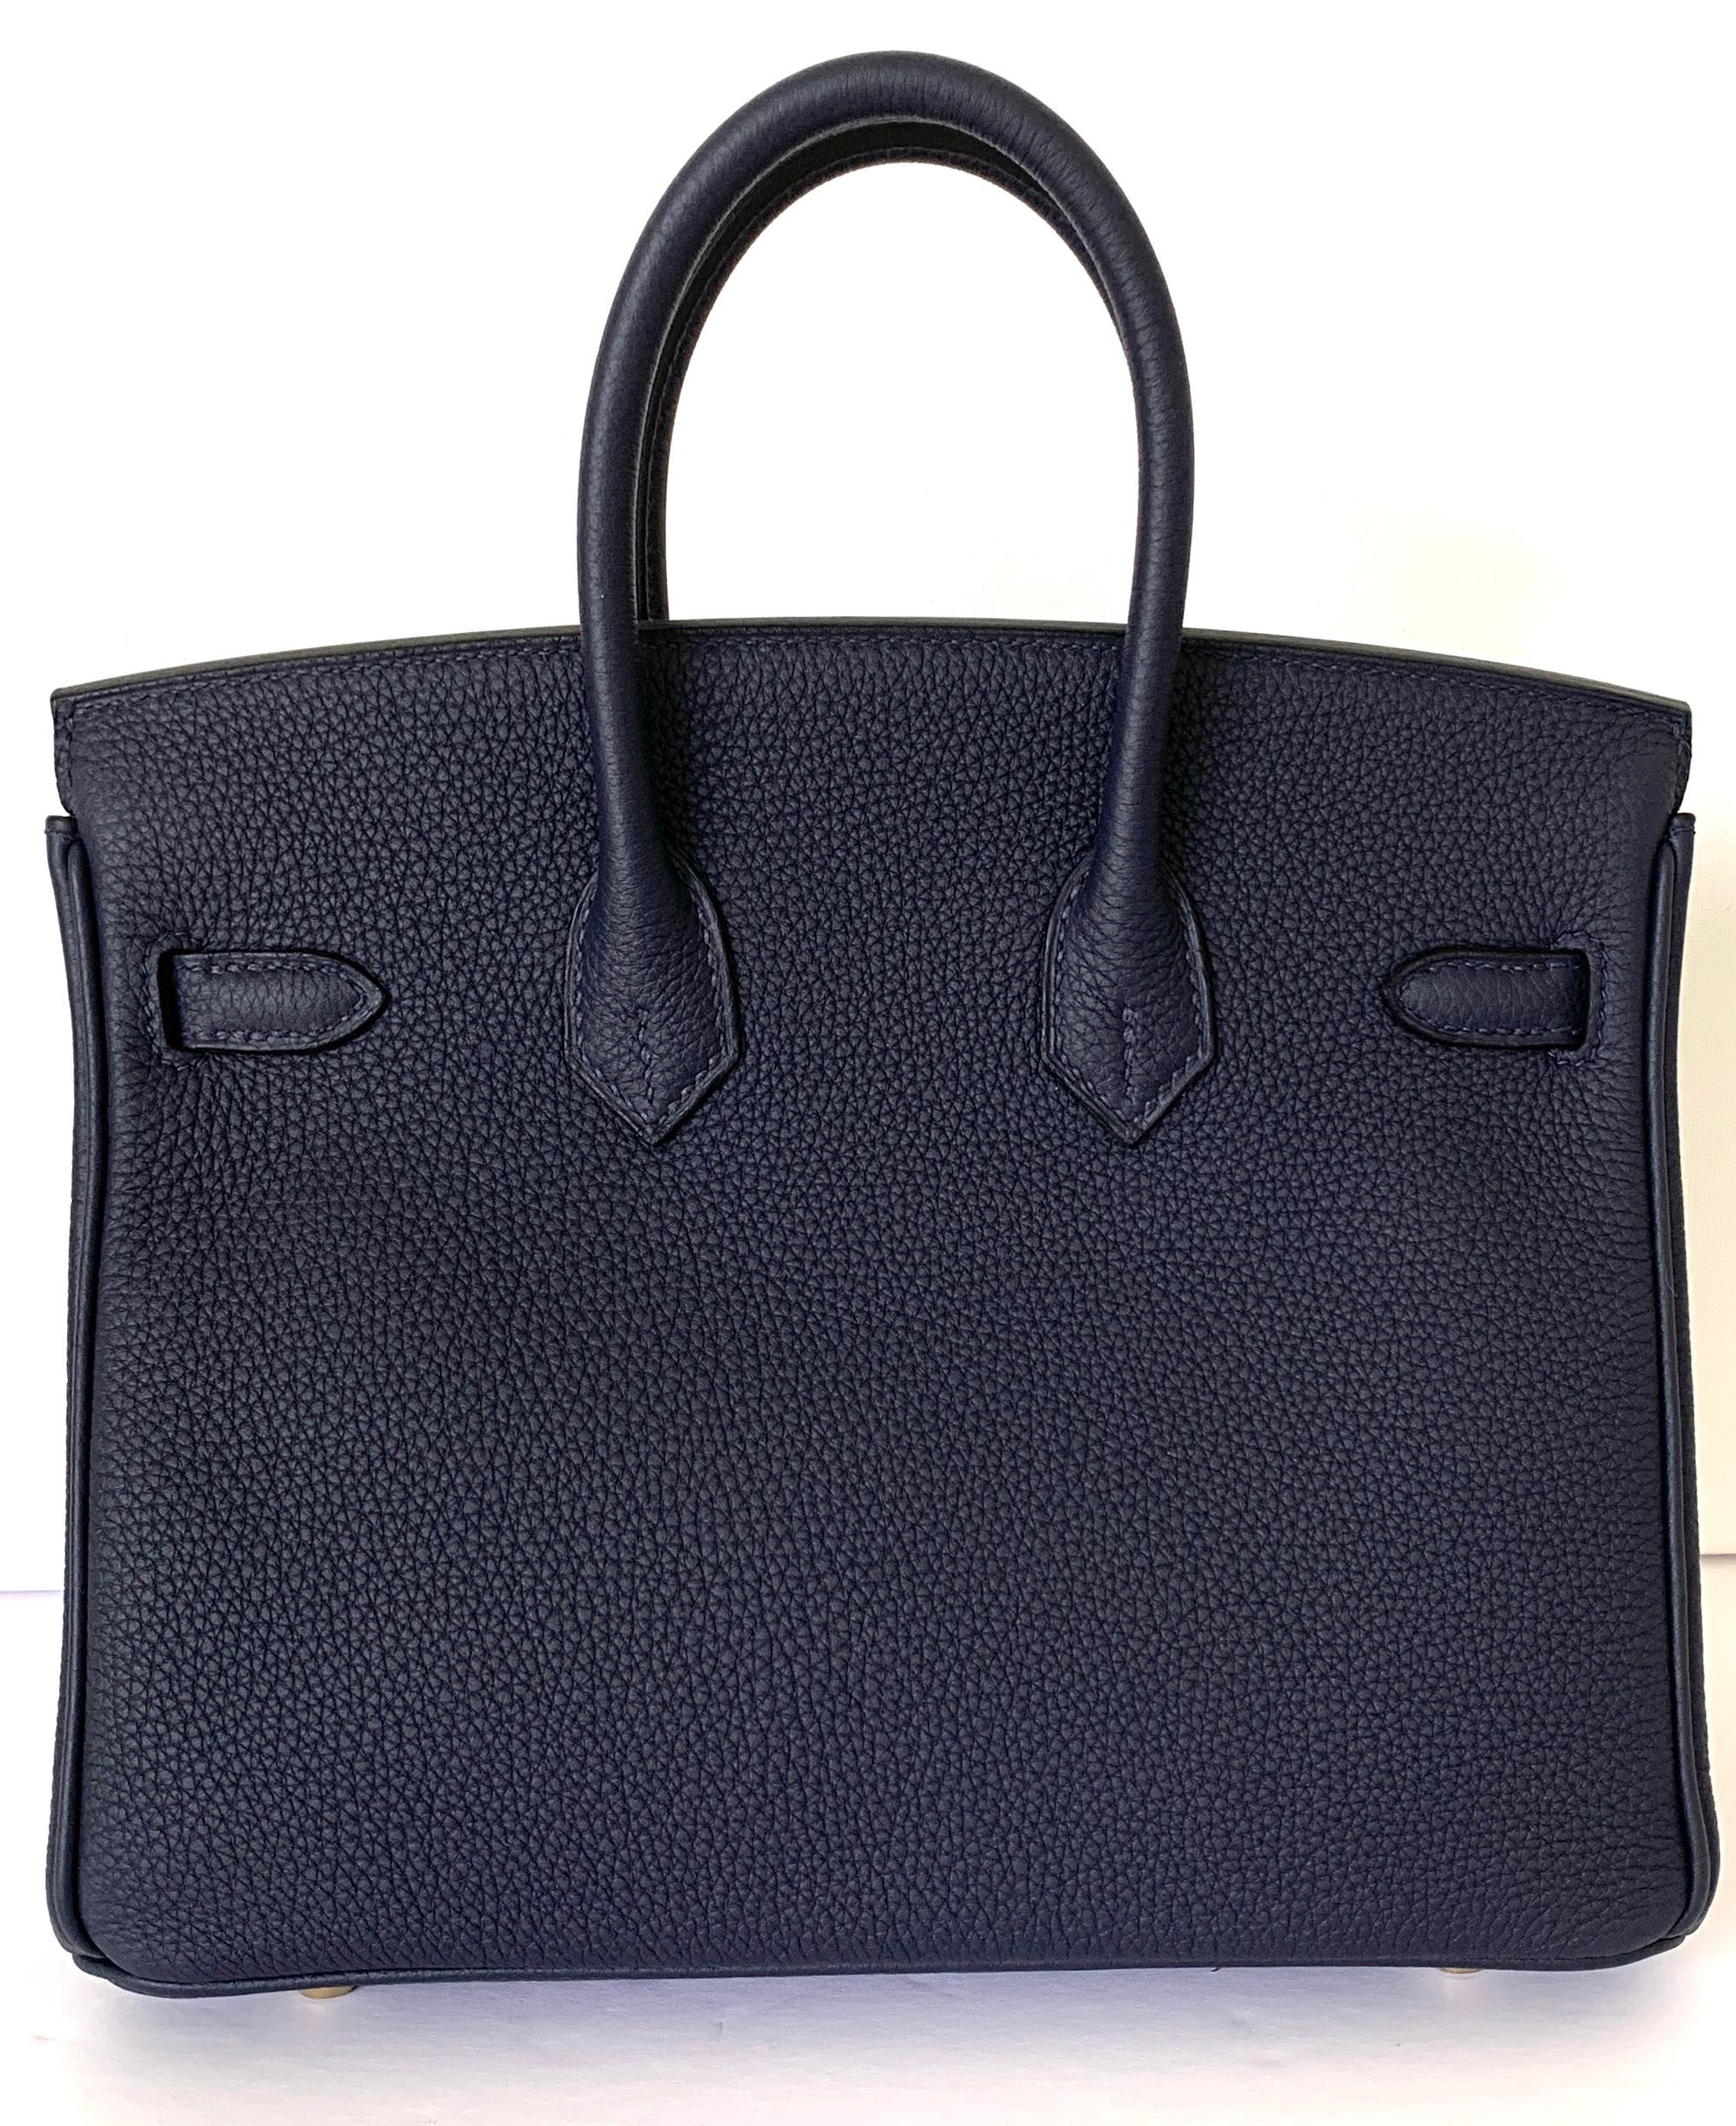 Hermes Birkin

25cm

Hermes Birkin 25cm

Blue Nuit
Togo Leather, one of the most durable leathers Hermes produces

A beautiful navy blue, set with gold hardware, can't beat this!
Size 25 is very hard to get and most desired

Dark Blue with Gold,